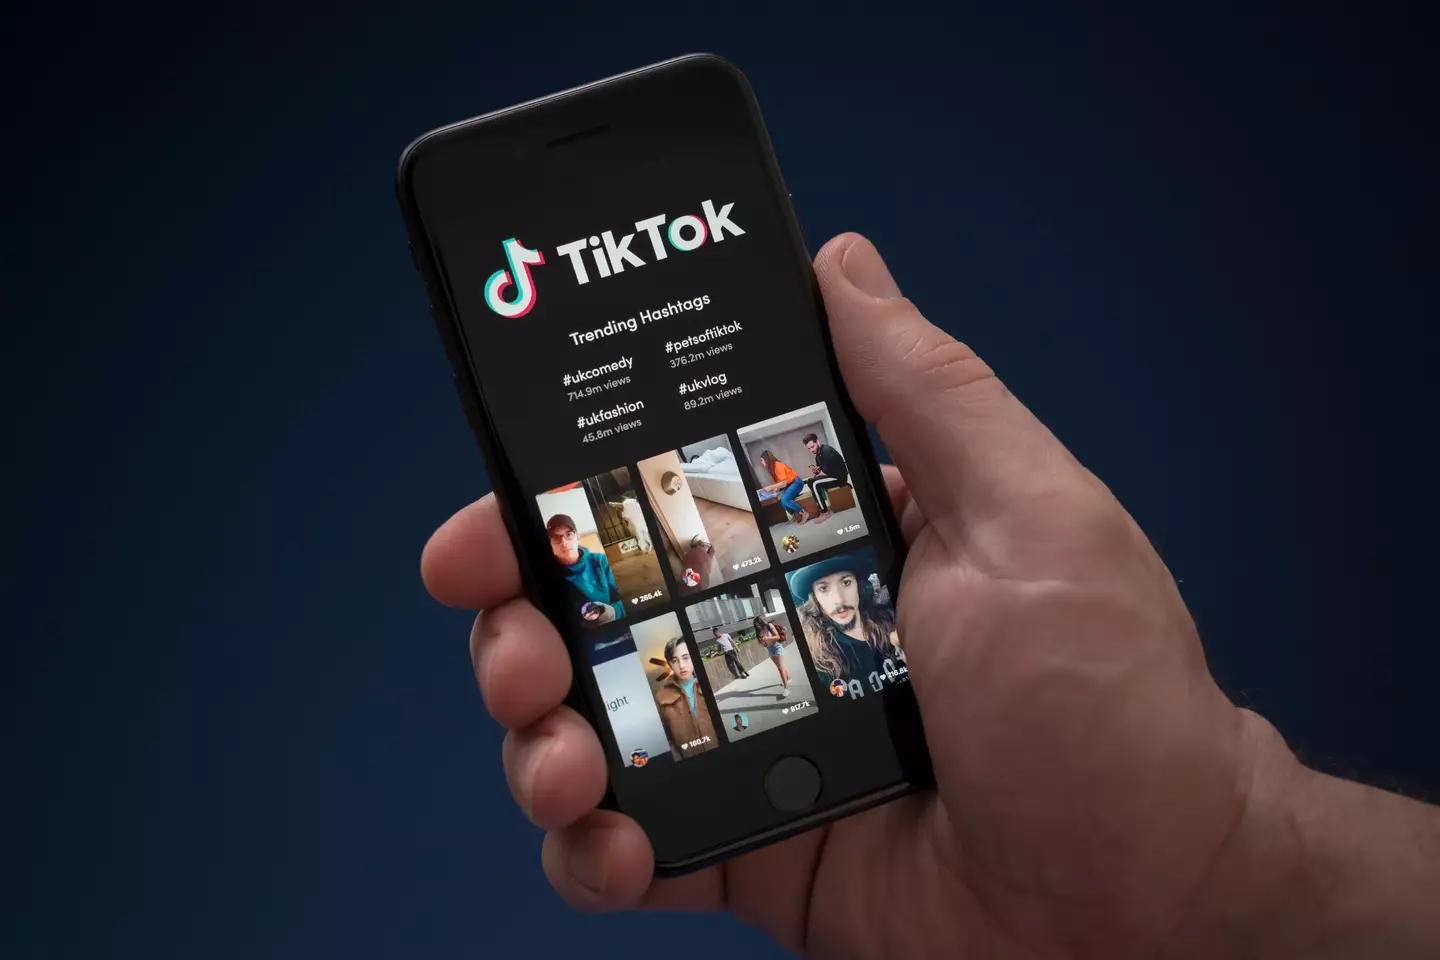 KSI admitted that you do not make much from TikTok.